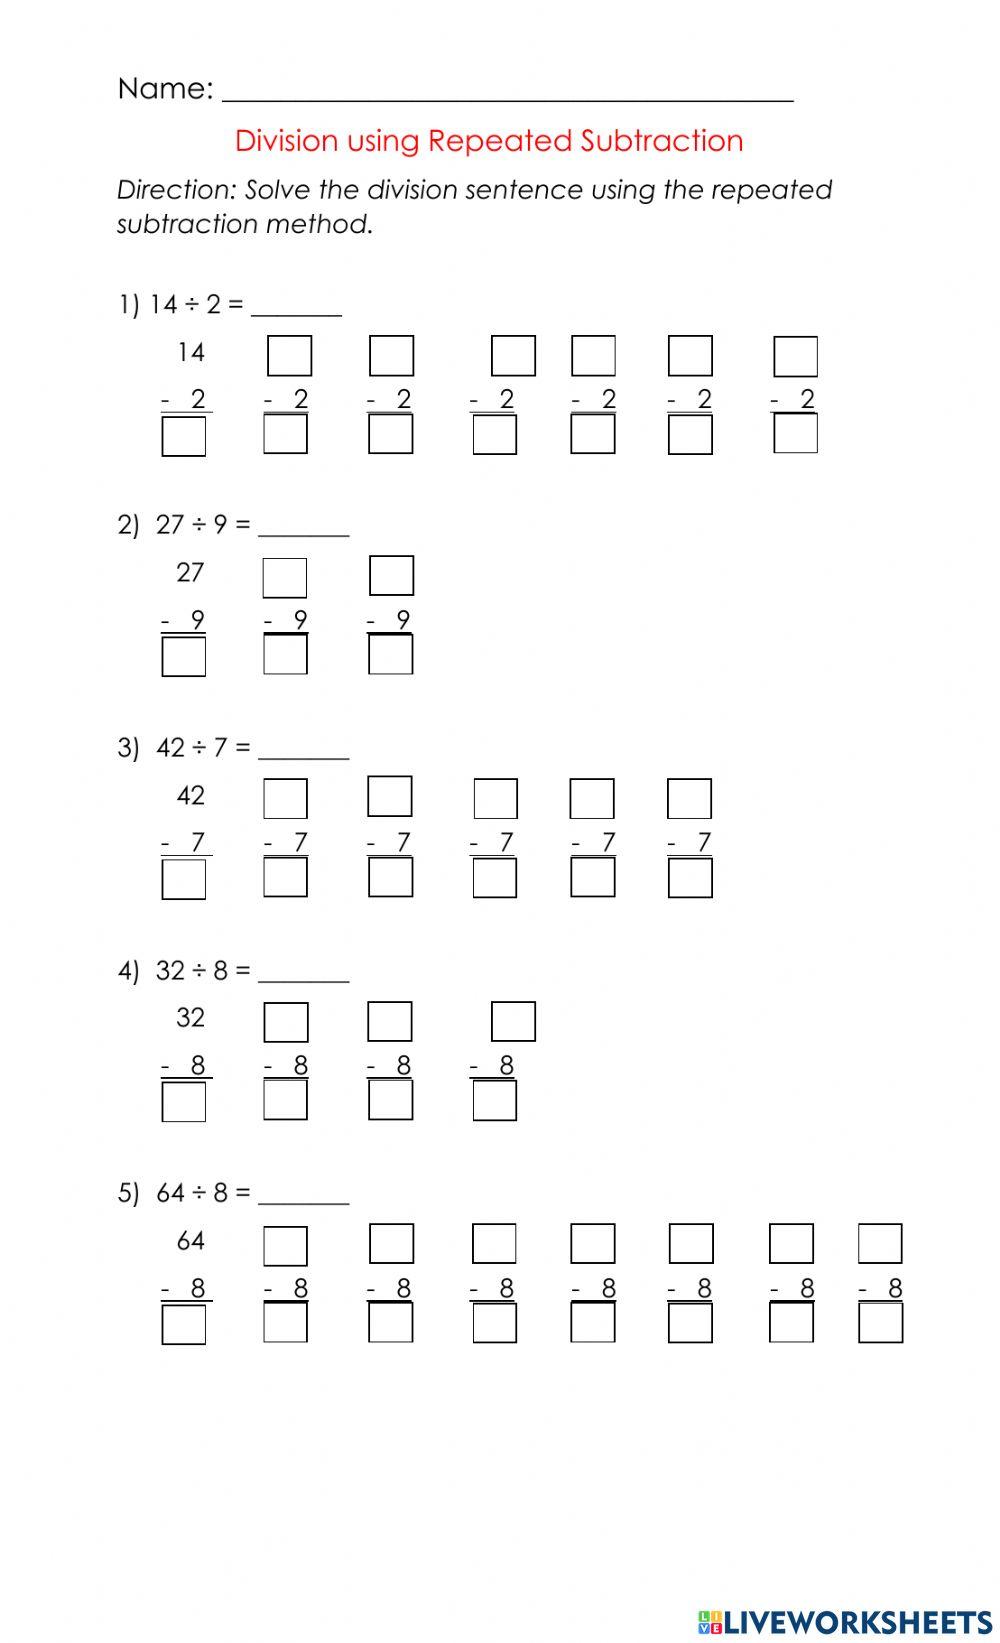 Division using Repeated Subtraction Method